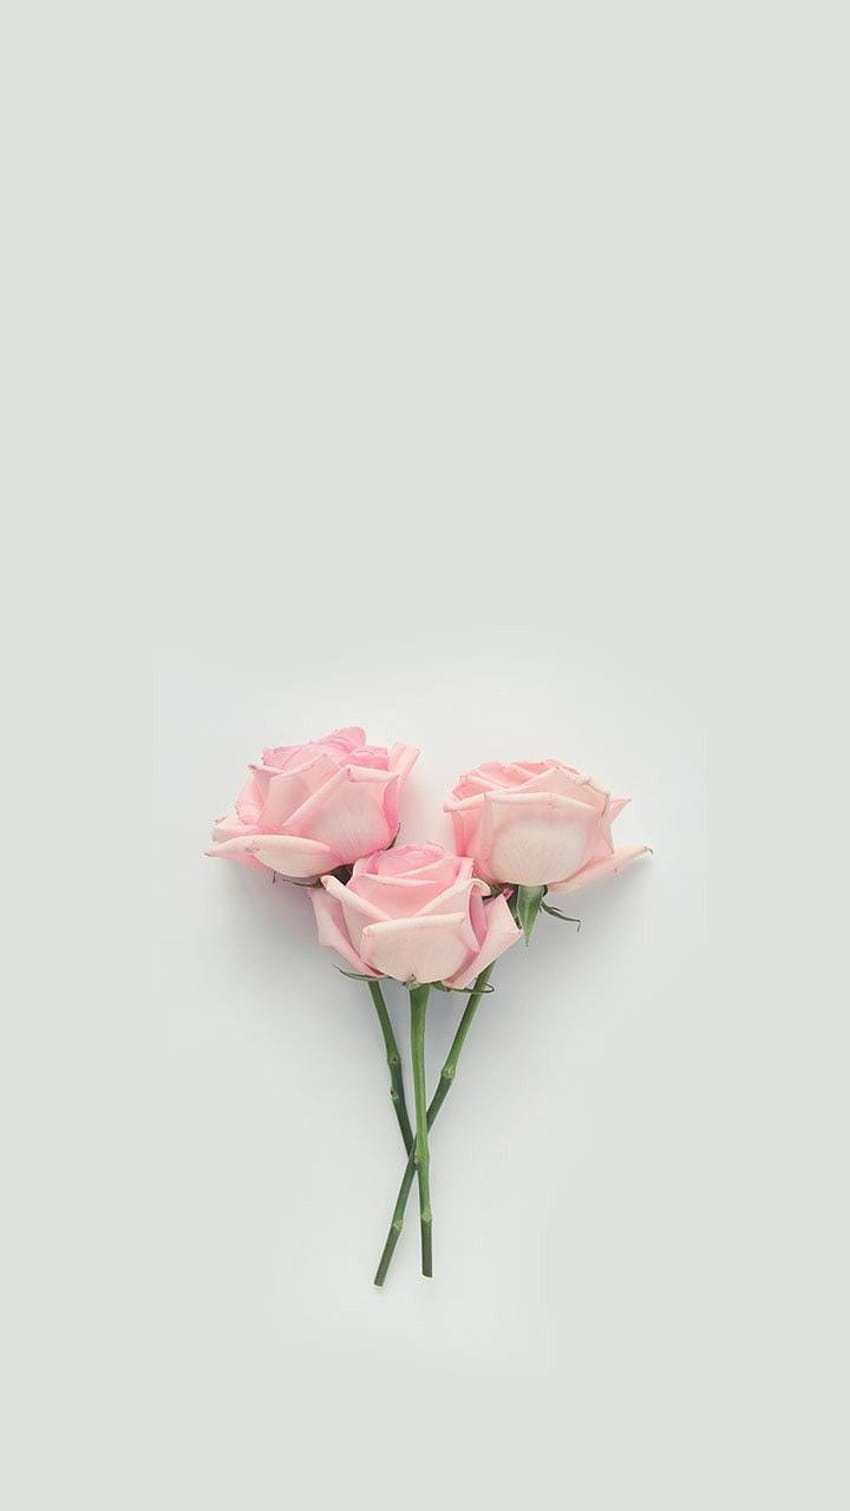 50 Aesthetic Rose iPhone Wallpapers Free Downloads